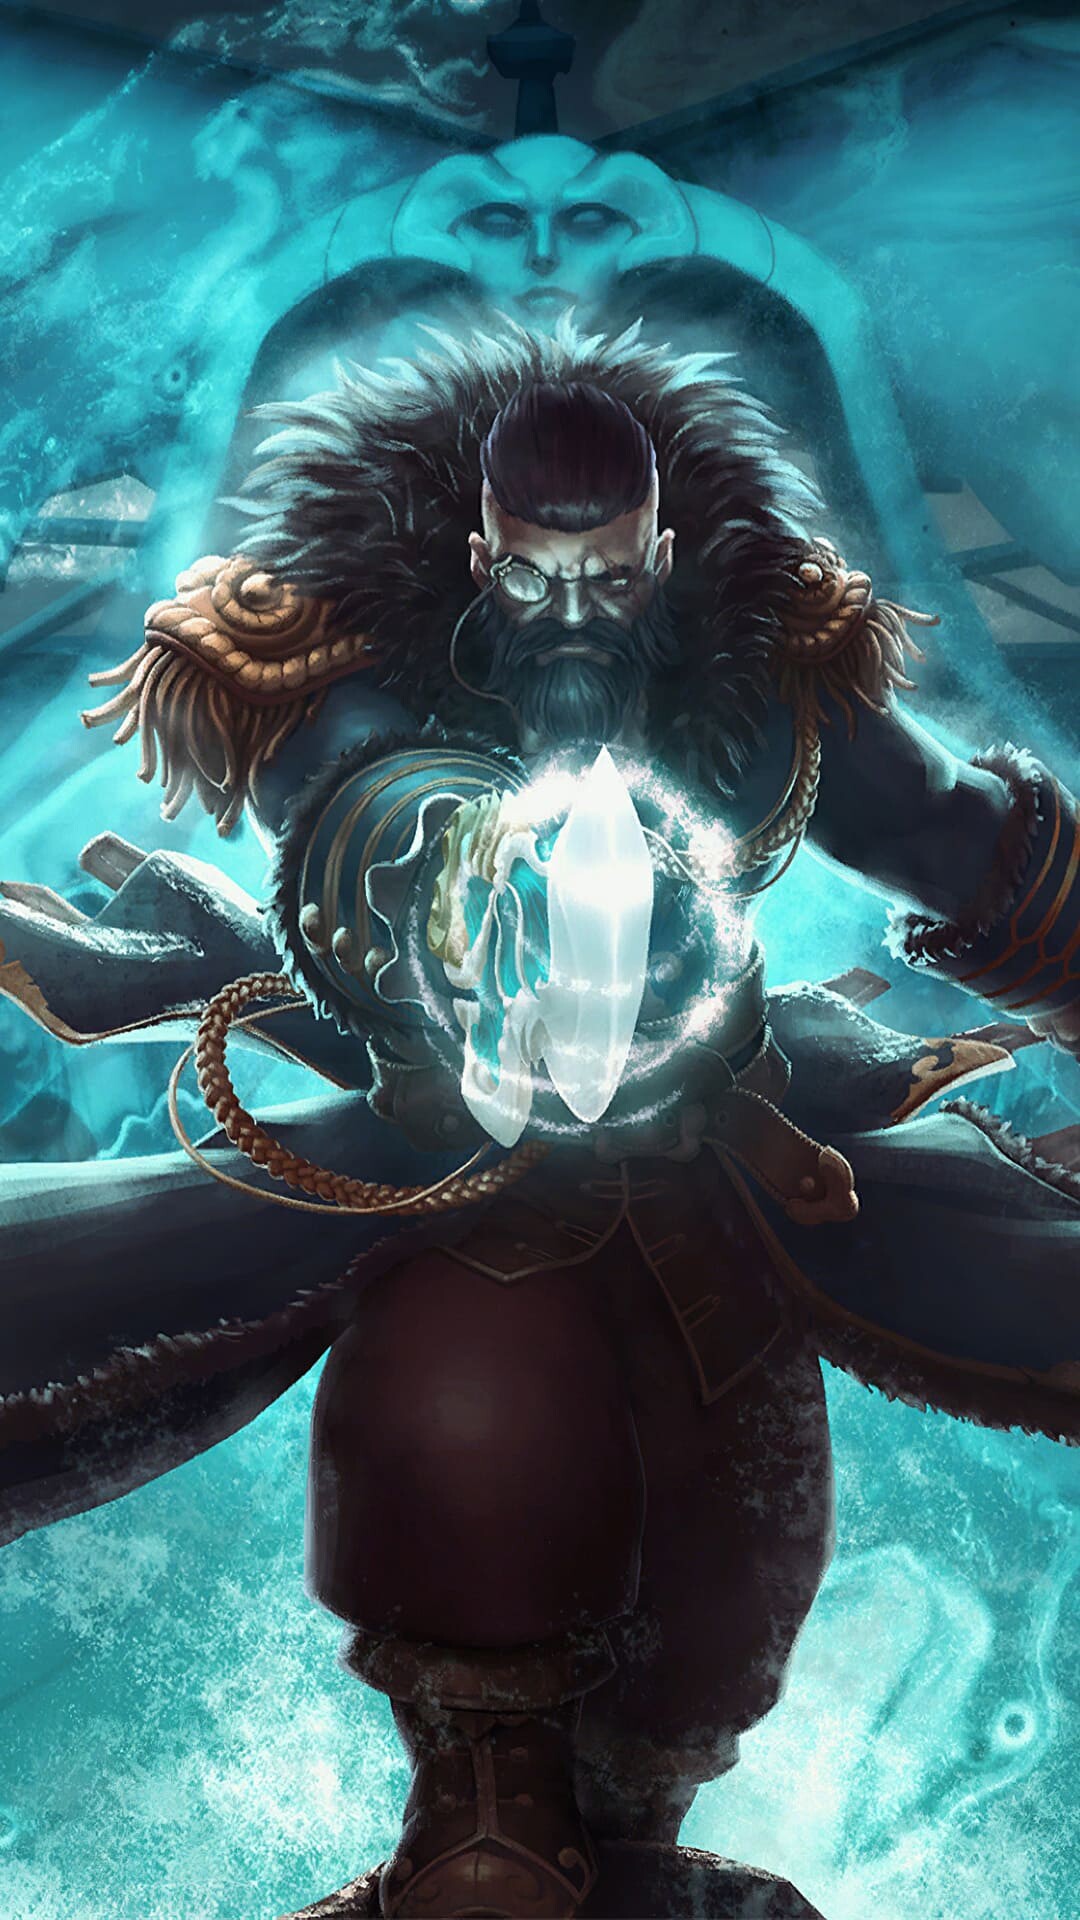 Dota 2: Kunkka, Disrupts enemy positioning and disables them. 1080x1920 Full HD Wallpaper.